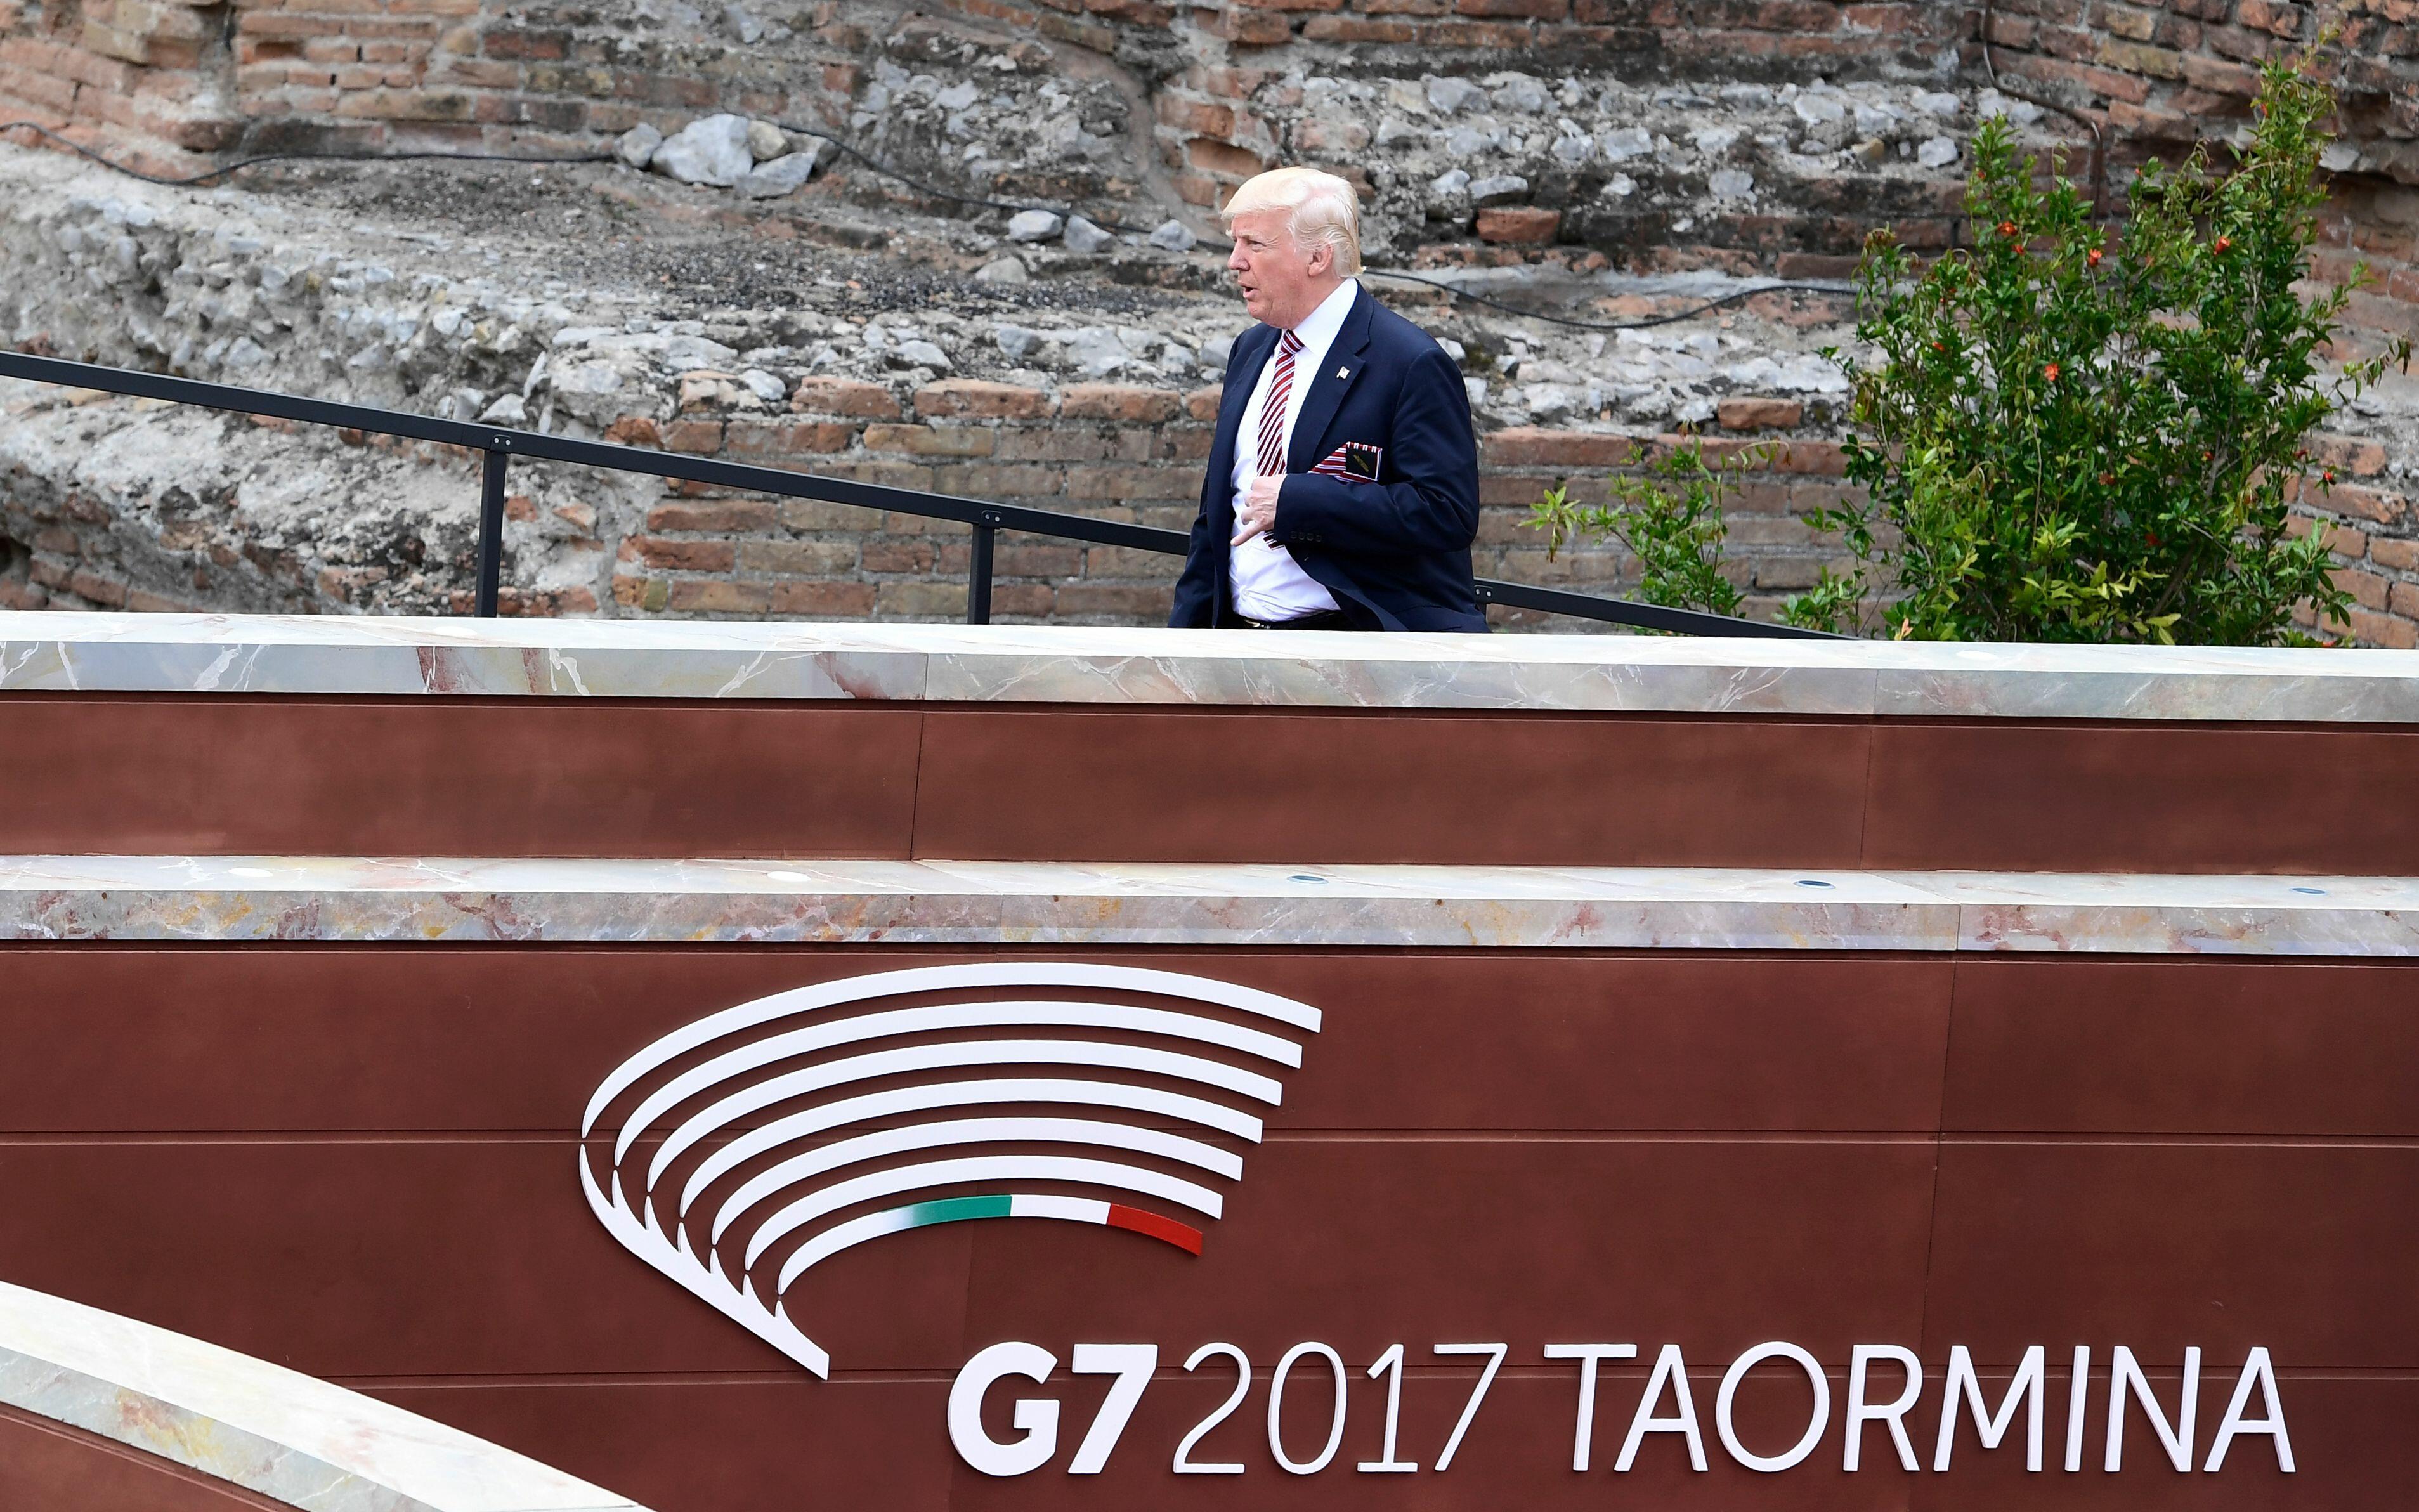 US President Donald Trump arrives for the Summit of the Heads of State and of Government of the G7, the group of most industrialized economies, plus the European Union, on May 26, 2017 at the ancient Greek Theater in Taormina, Sicily. The leaders of Brita